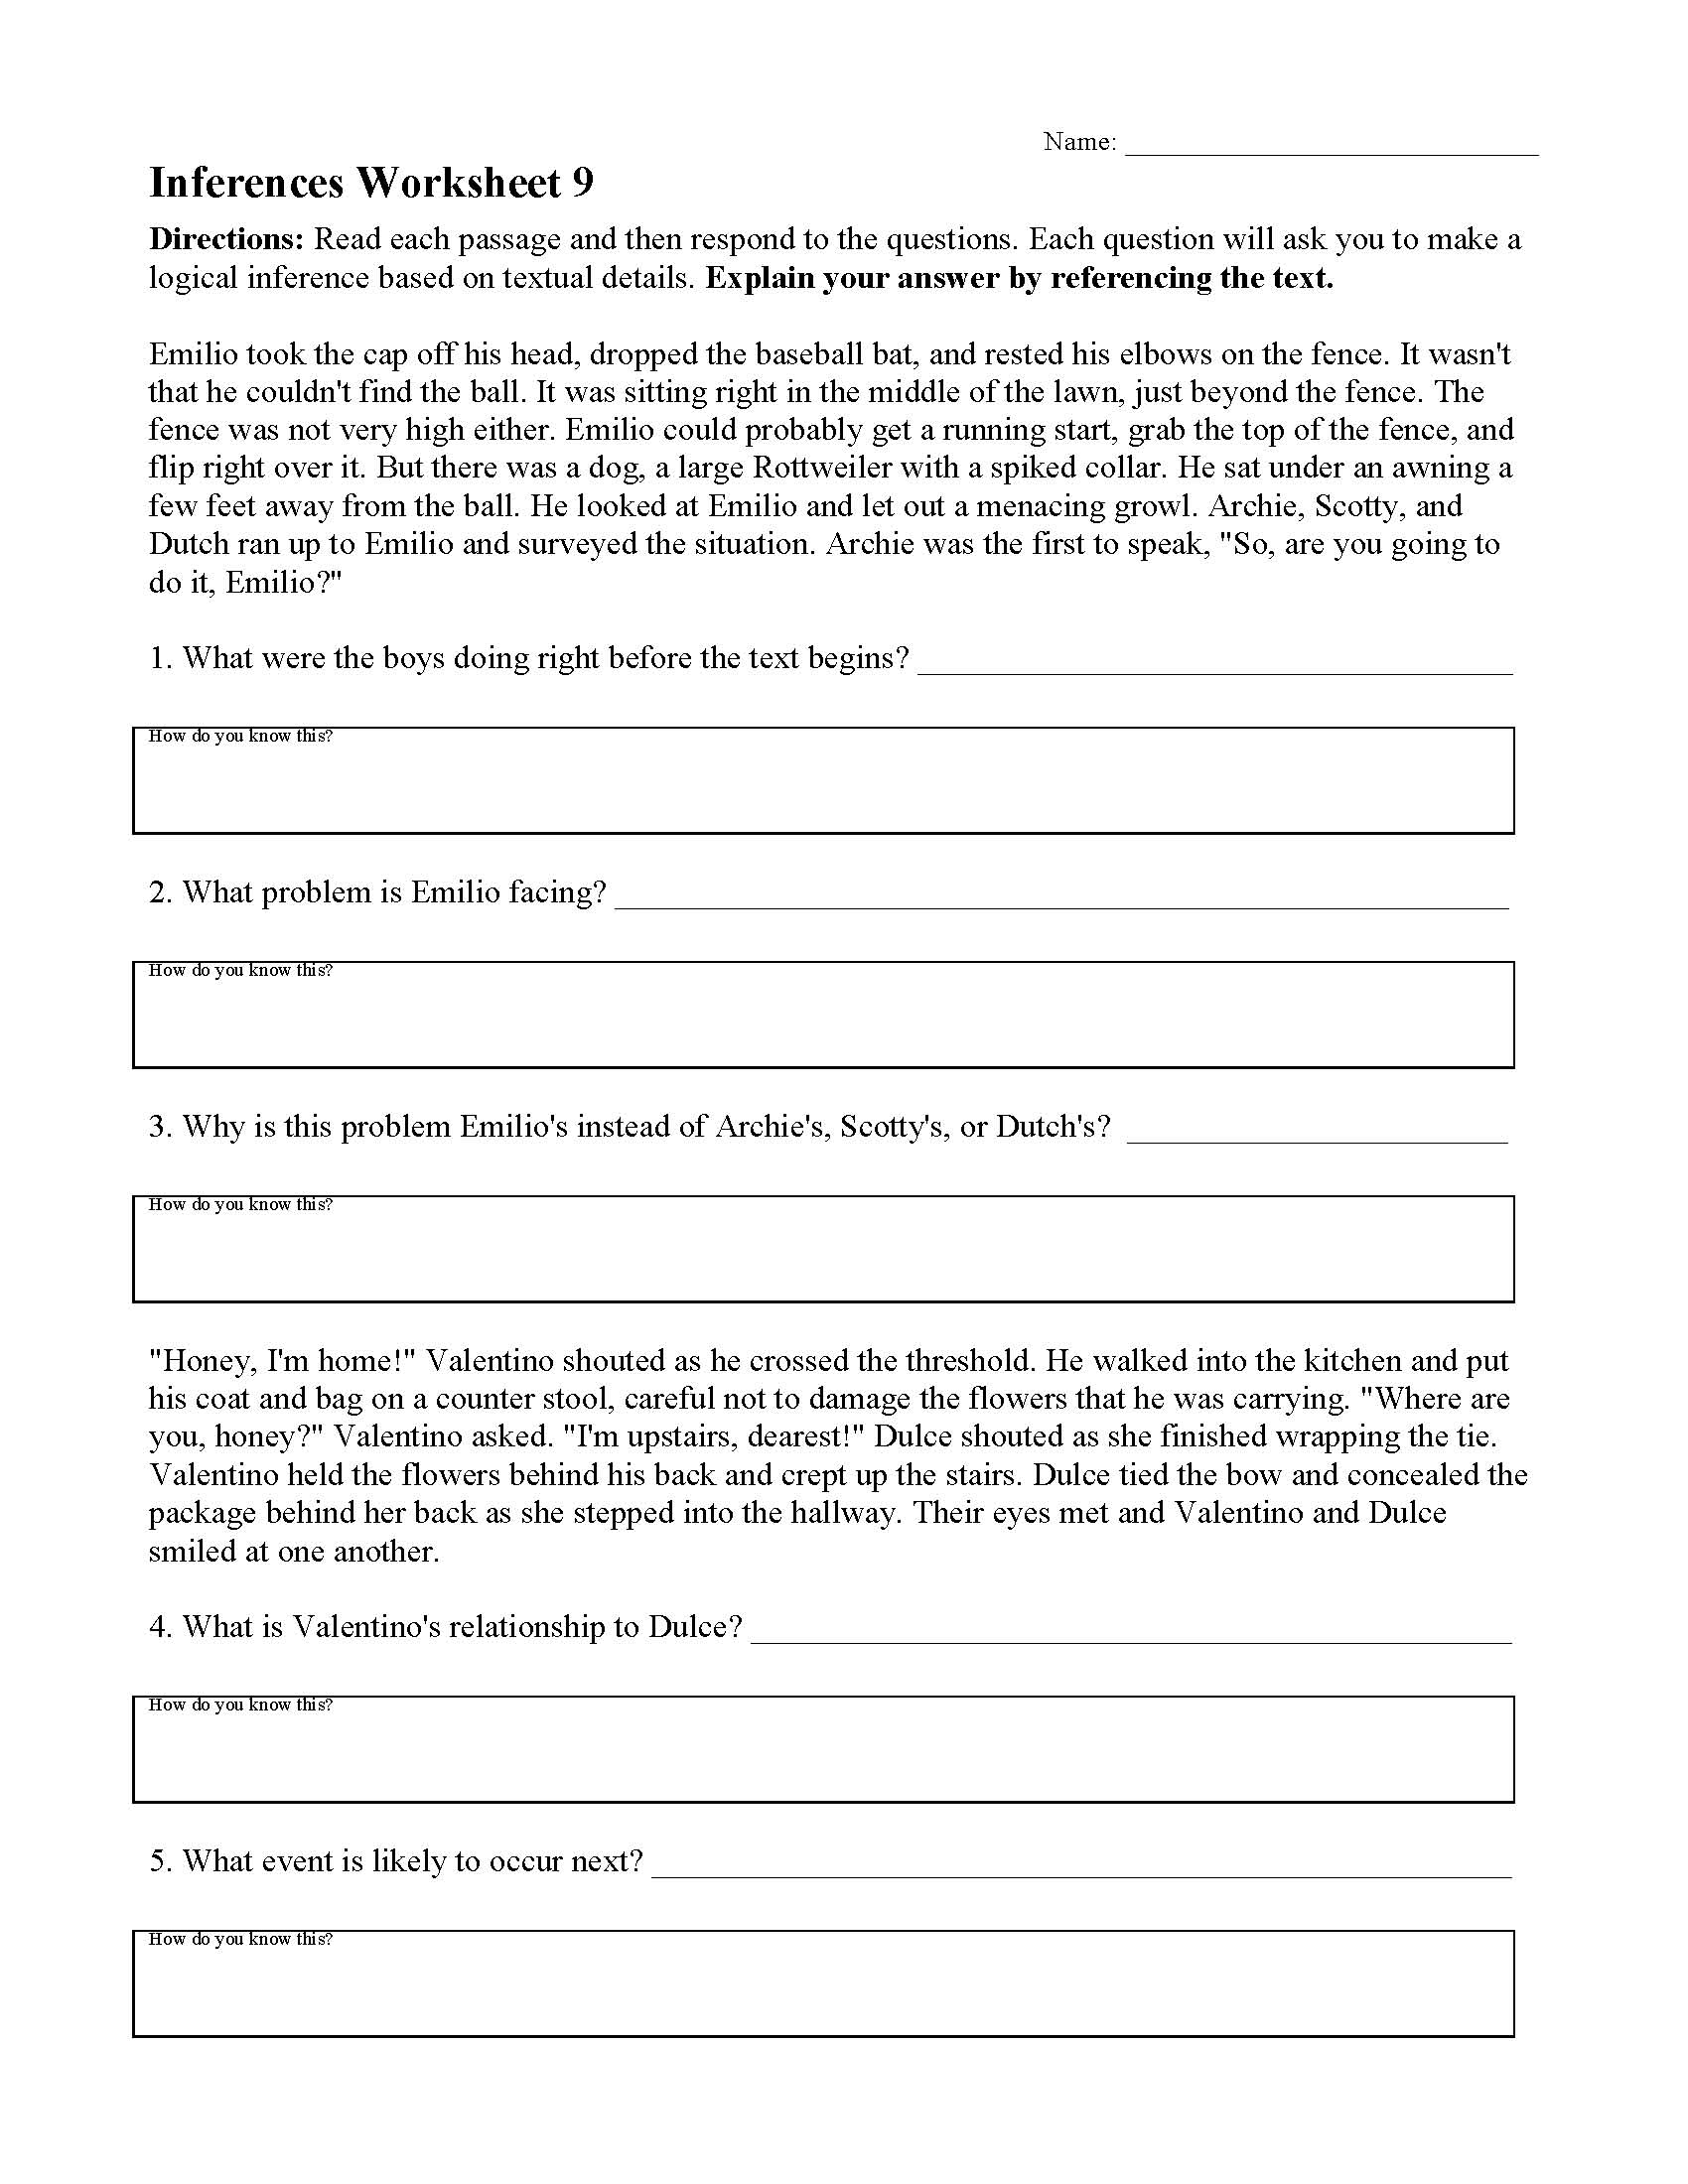 Inferences Worksheet 9 | Preview